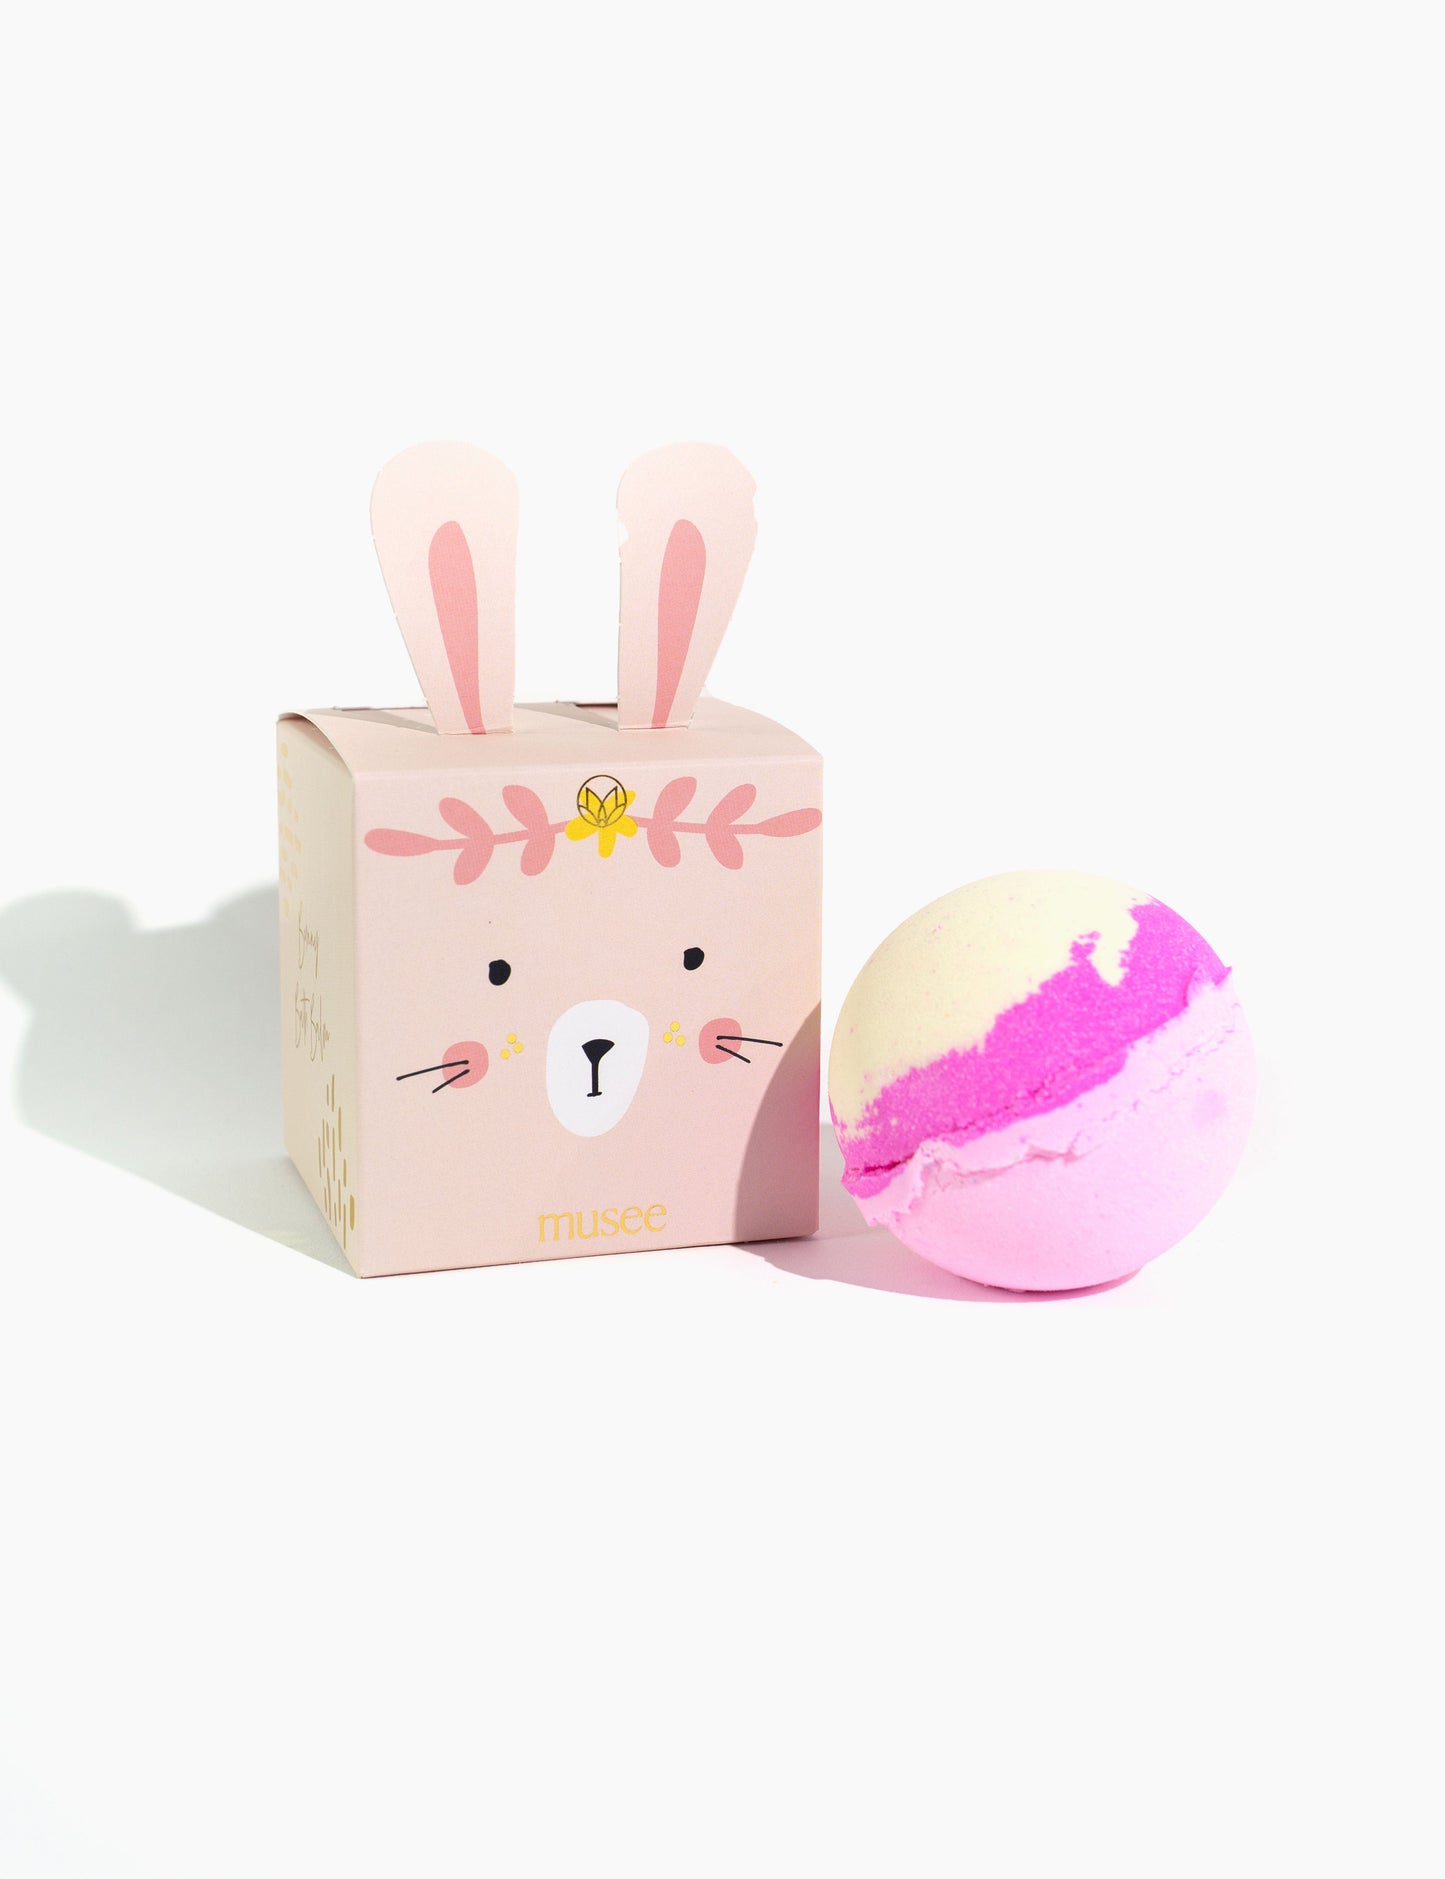 Musee Boxed Bath Balm Bath & Body in Pink Bunny at Wrapsody